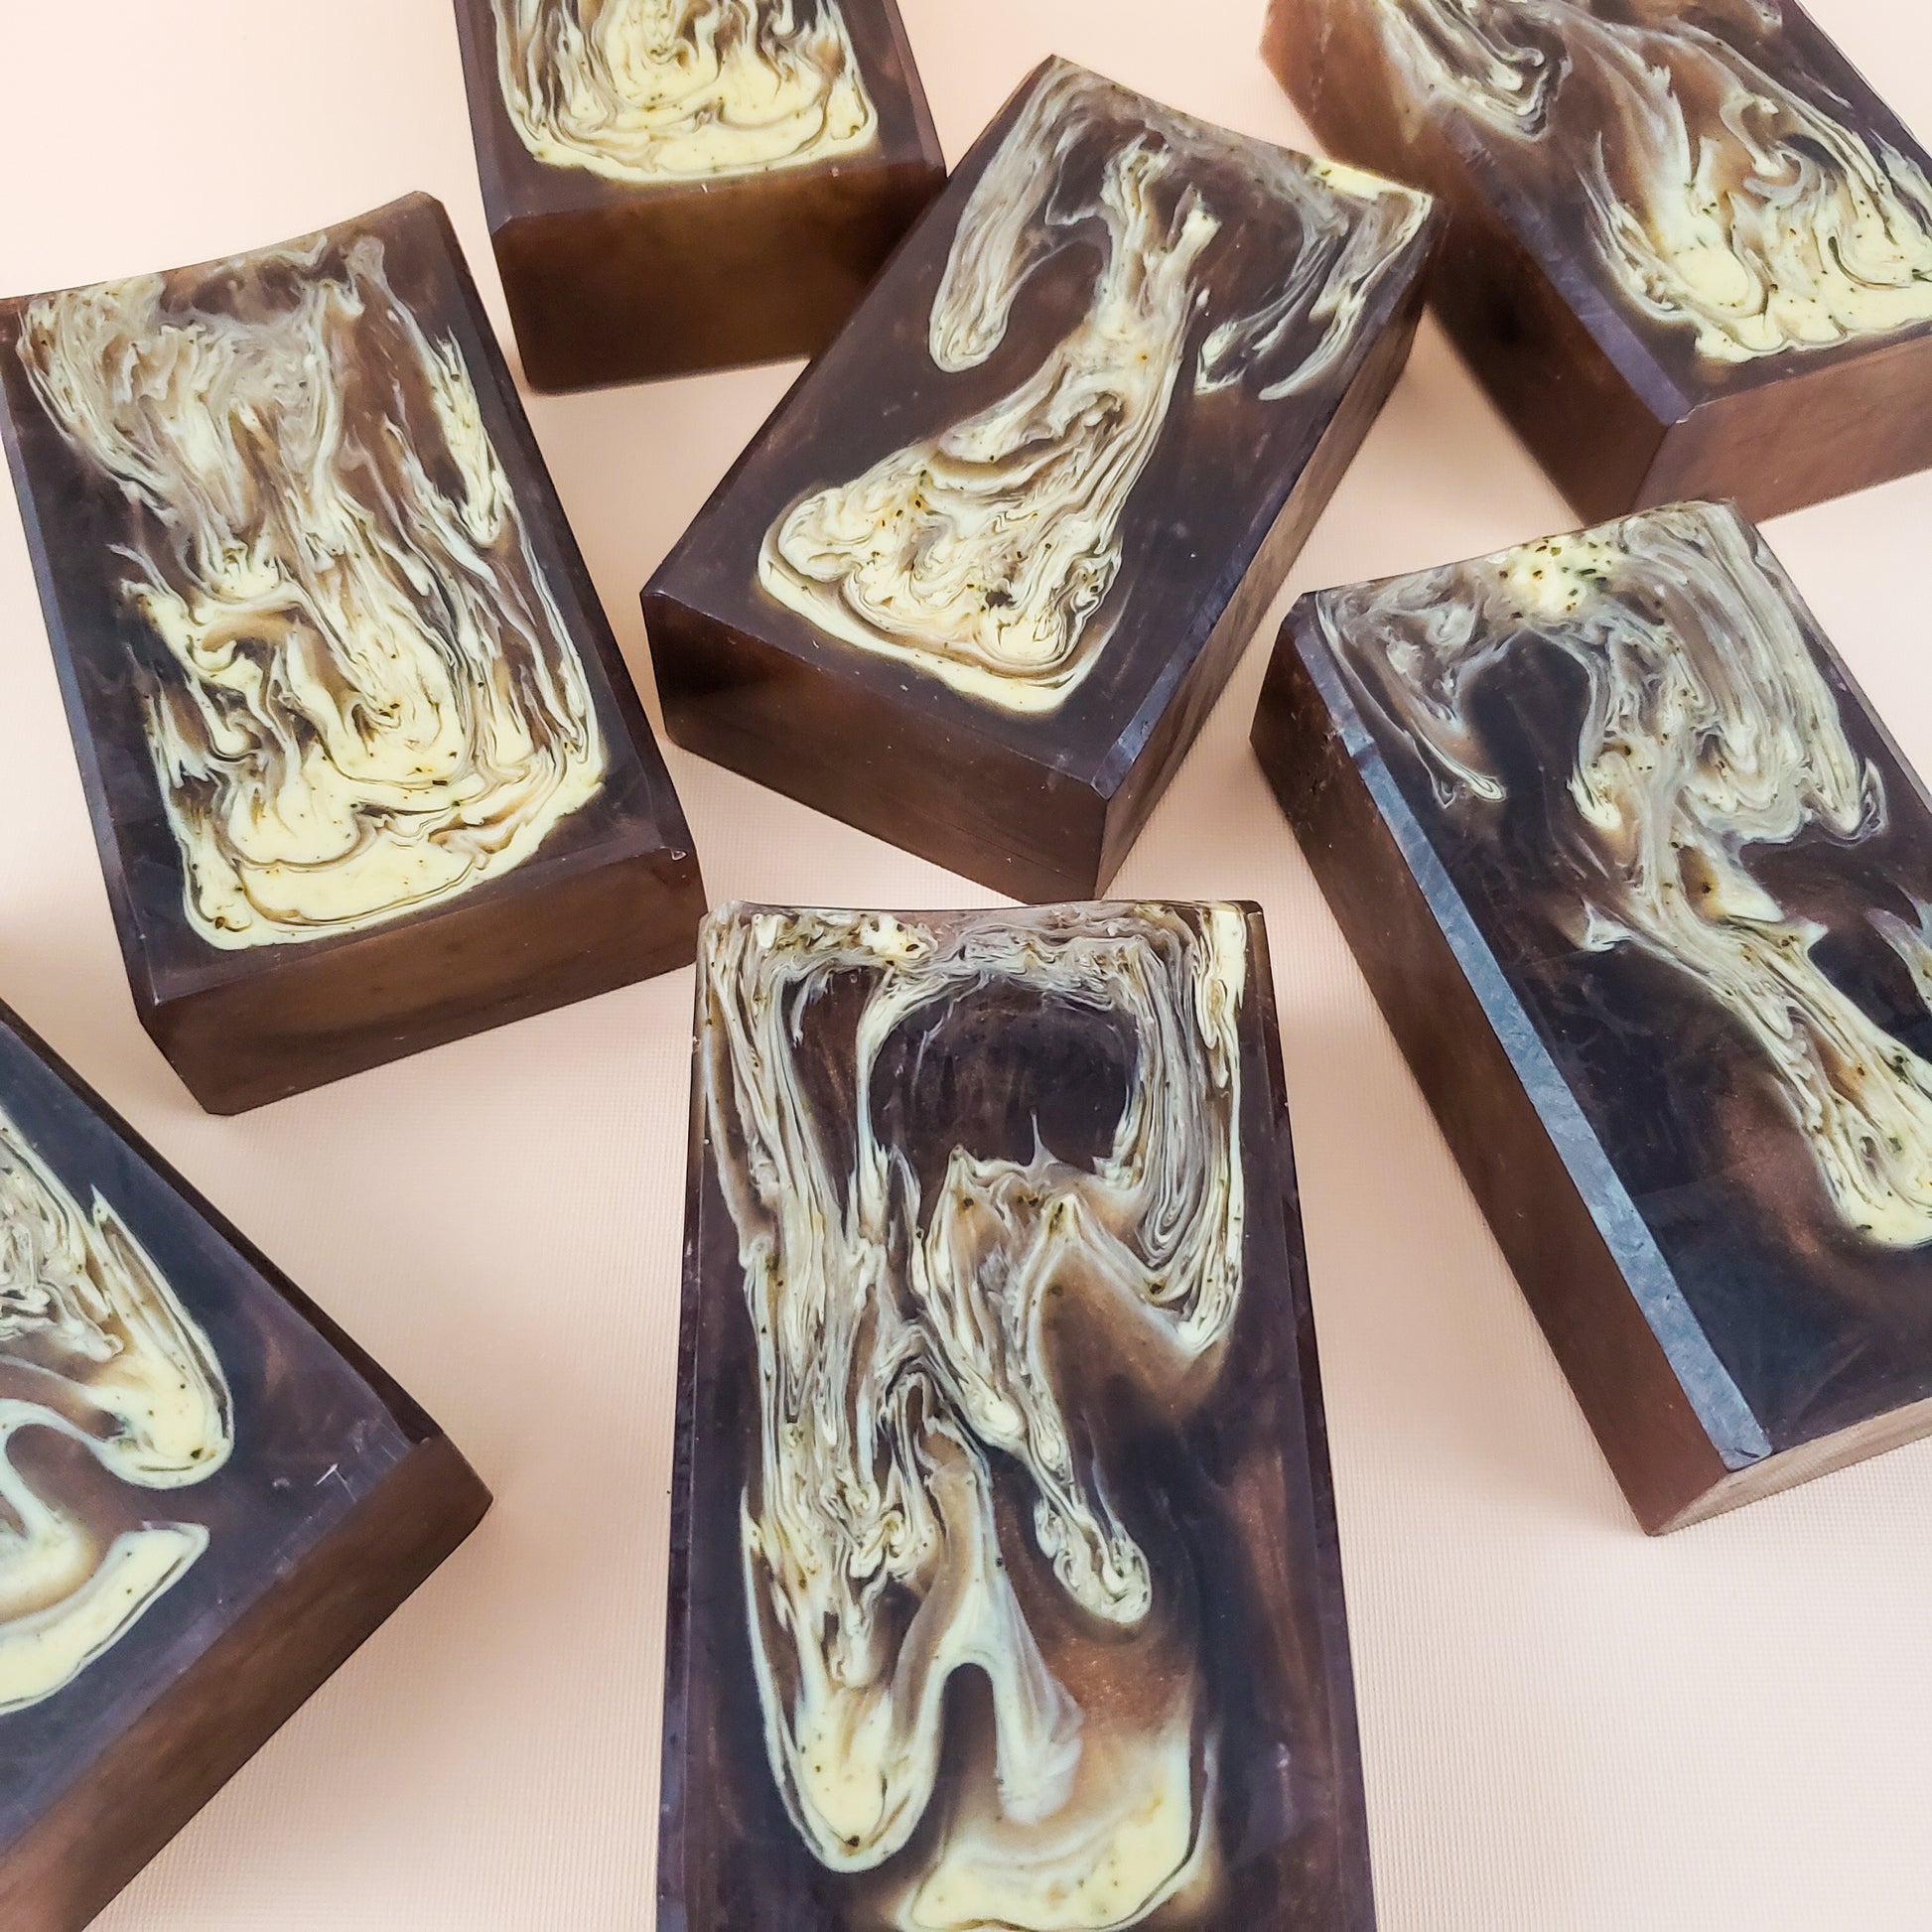 brown bar soaps with light brown swirls on a tan background